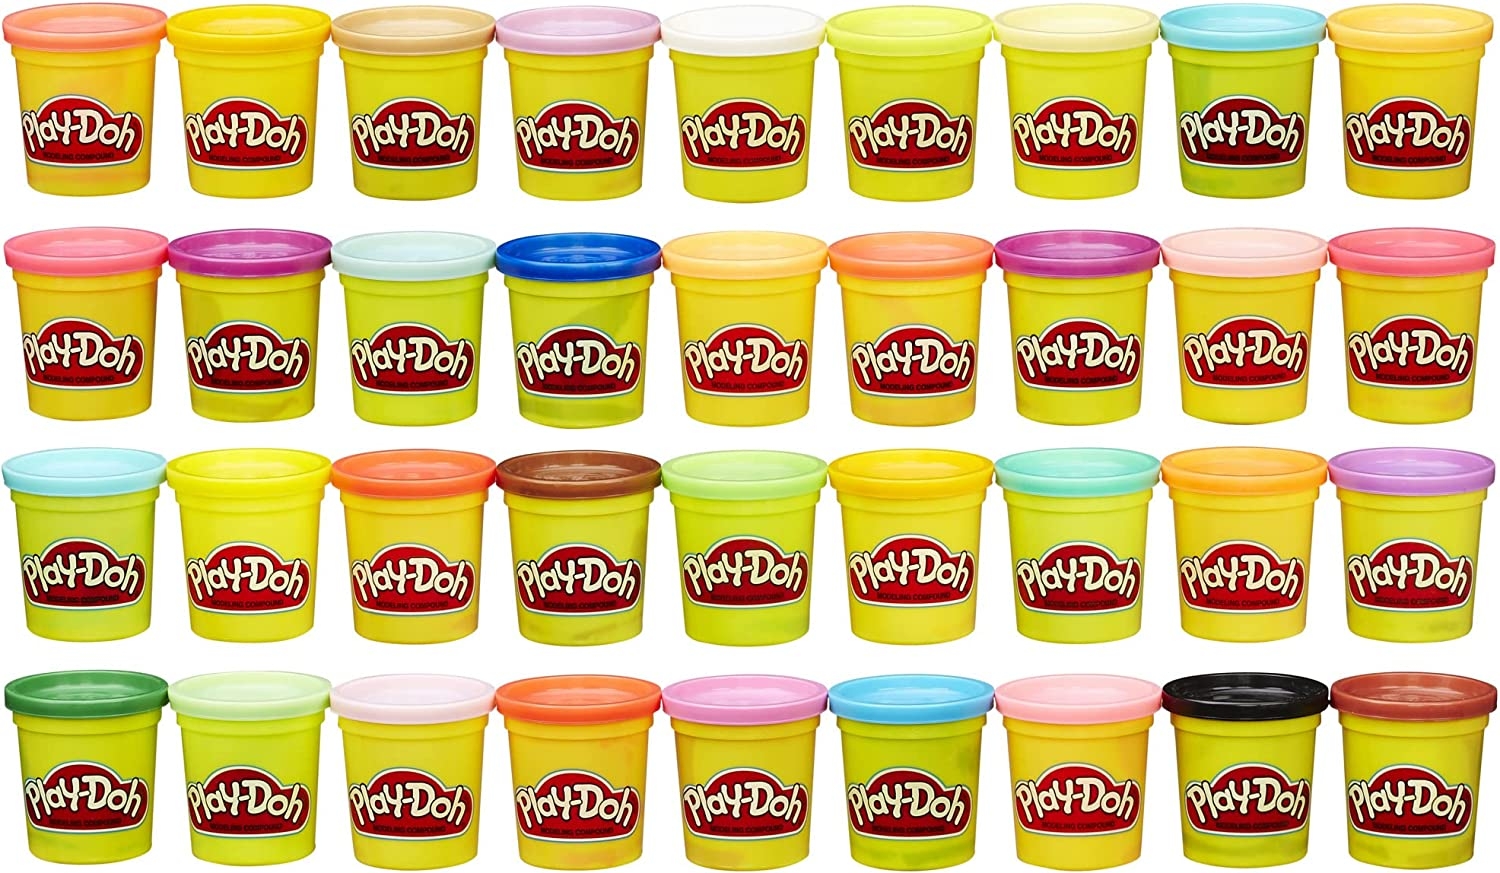 Play-Doh Modeling Compound 36 Pack Case of Colors, Non-Toxic, Assorted Colors, 3 Oz Cans (Amazon Exclusive) Import To Shop